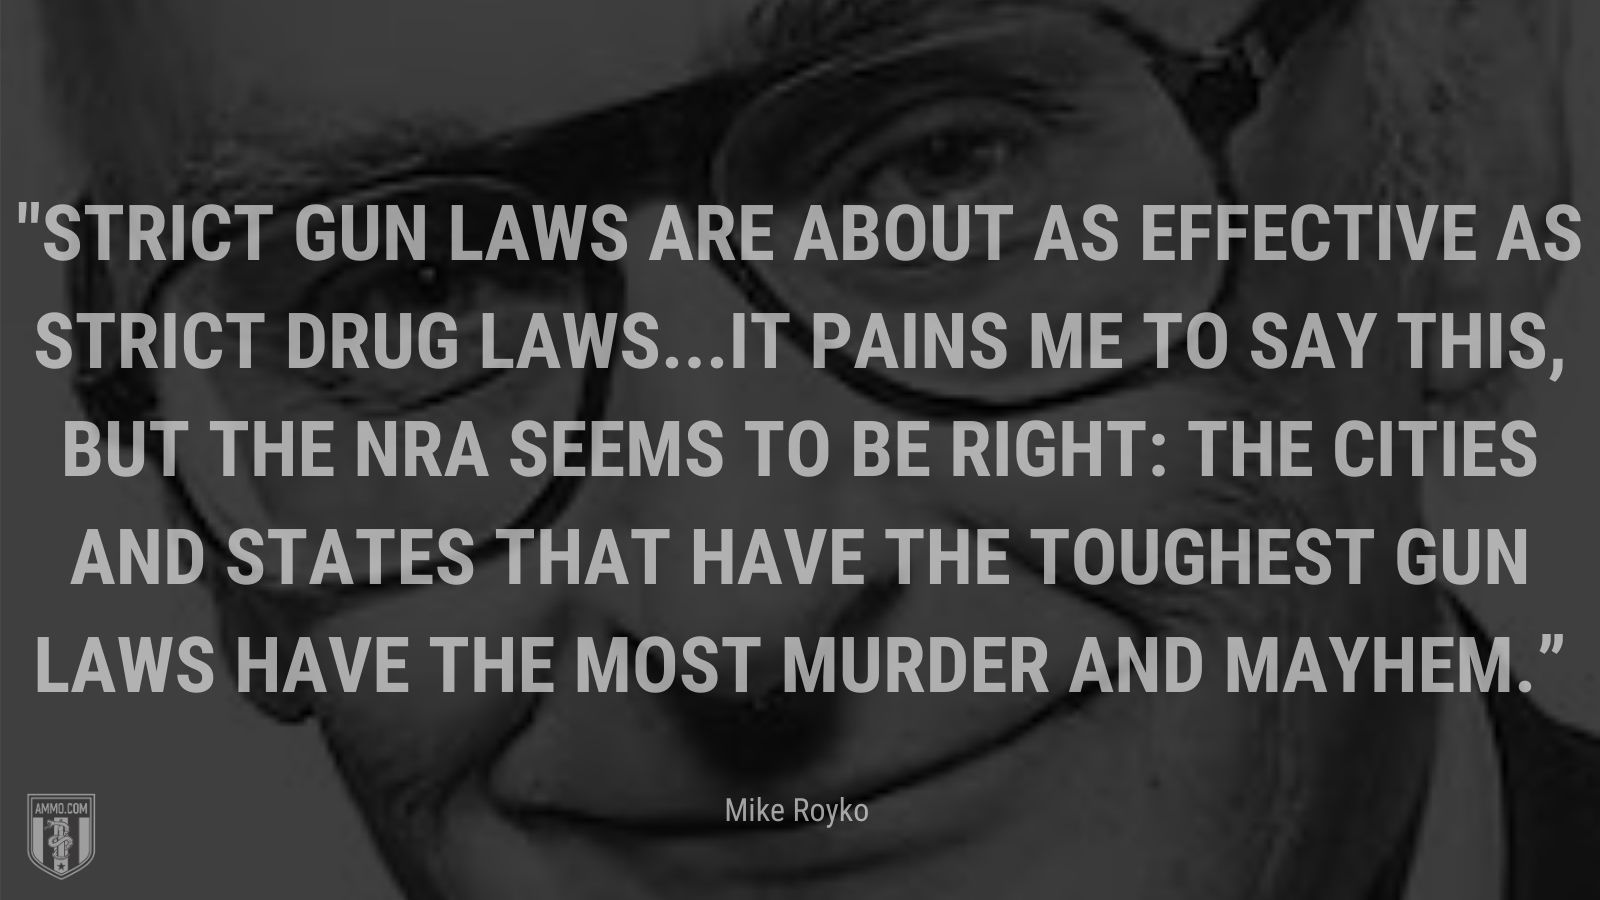 “Strict gun laws are about as effective as strict drug laws...It pains me to say this, but the NRA seems to be right: The cities and states that have the toughest gun laws have the most murder and mayhem.” - Mike Royko, Chicago Tribune columnist